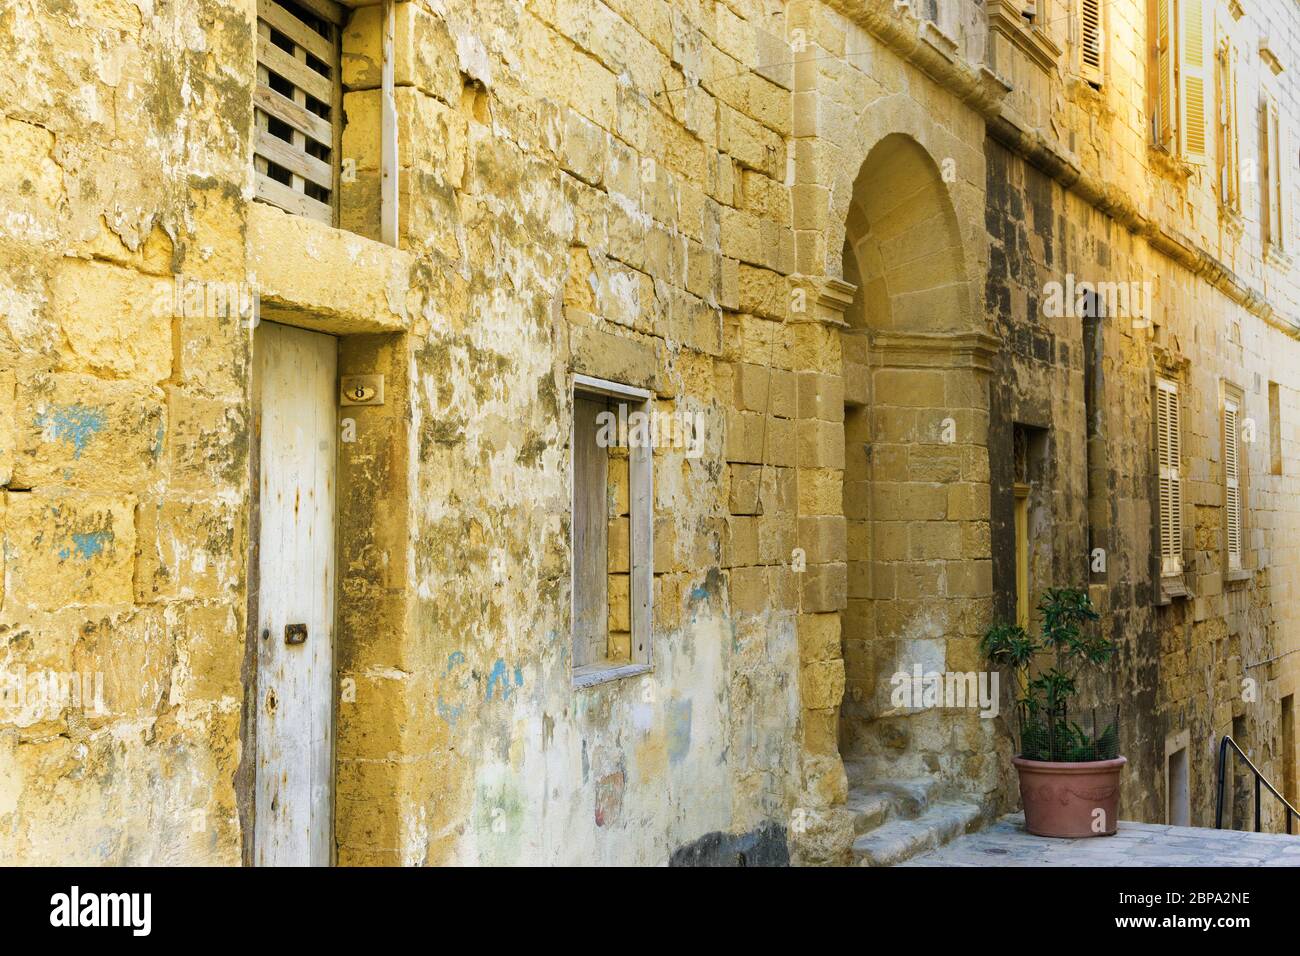 Old and traditional buildings in Senglea, Malta Stock Photo